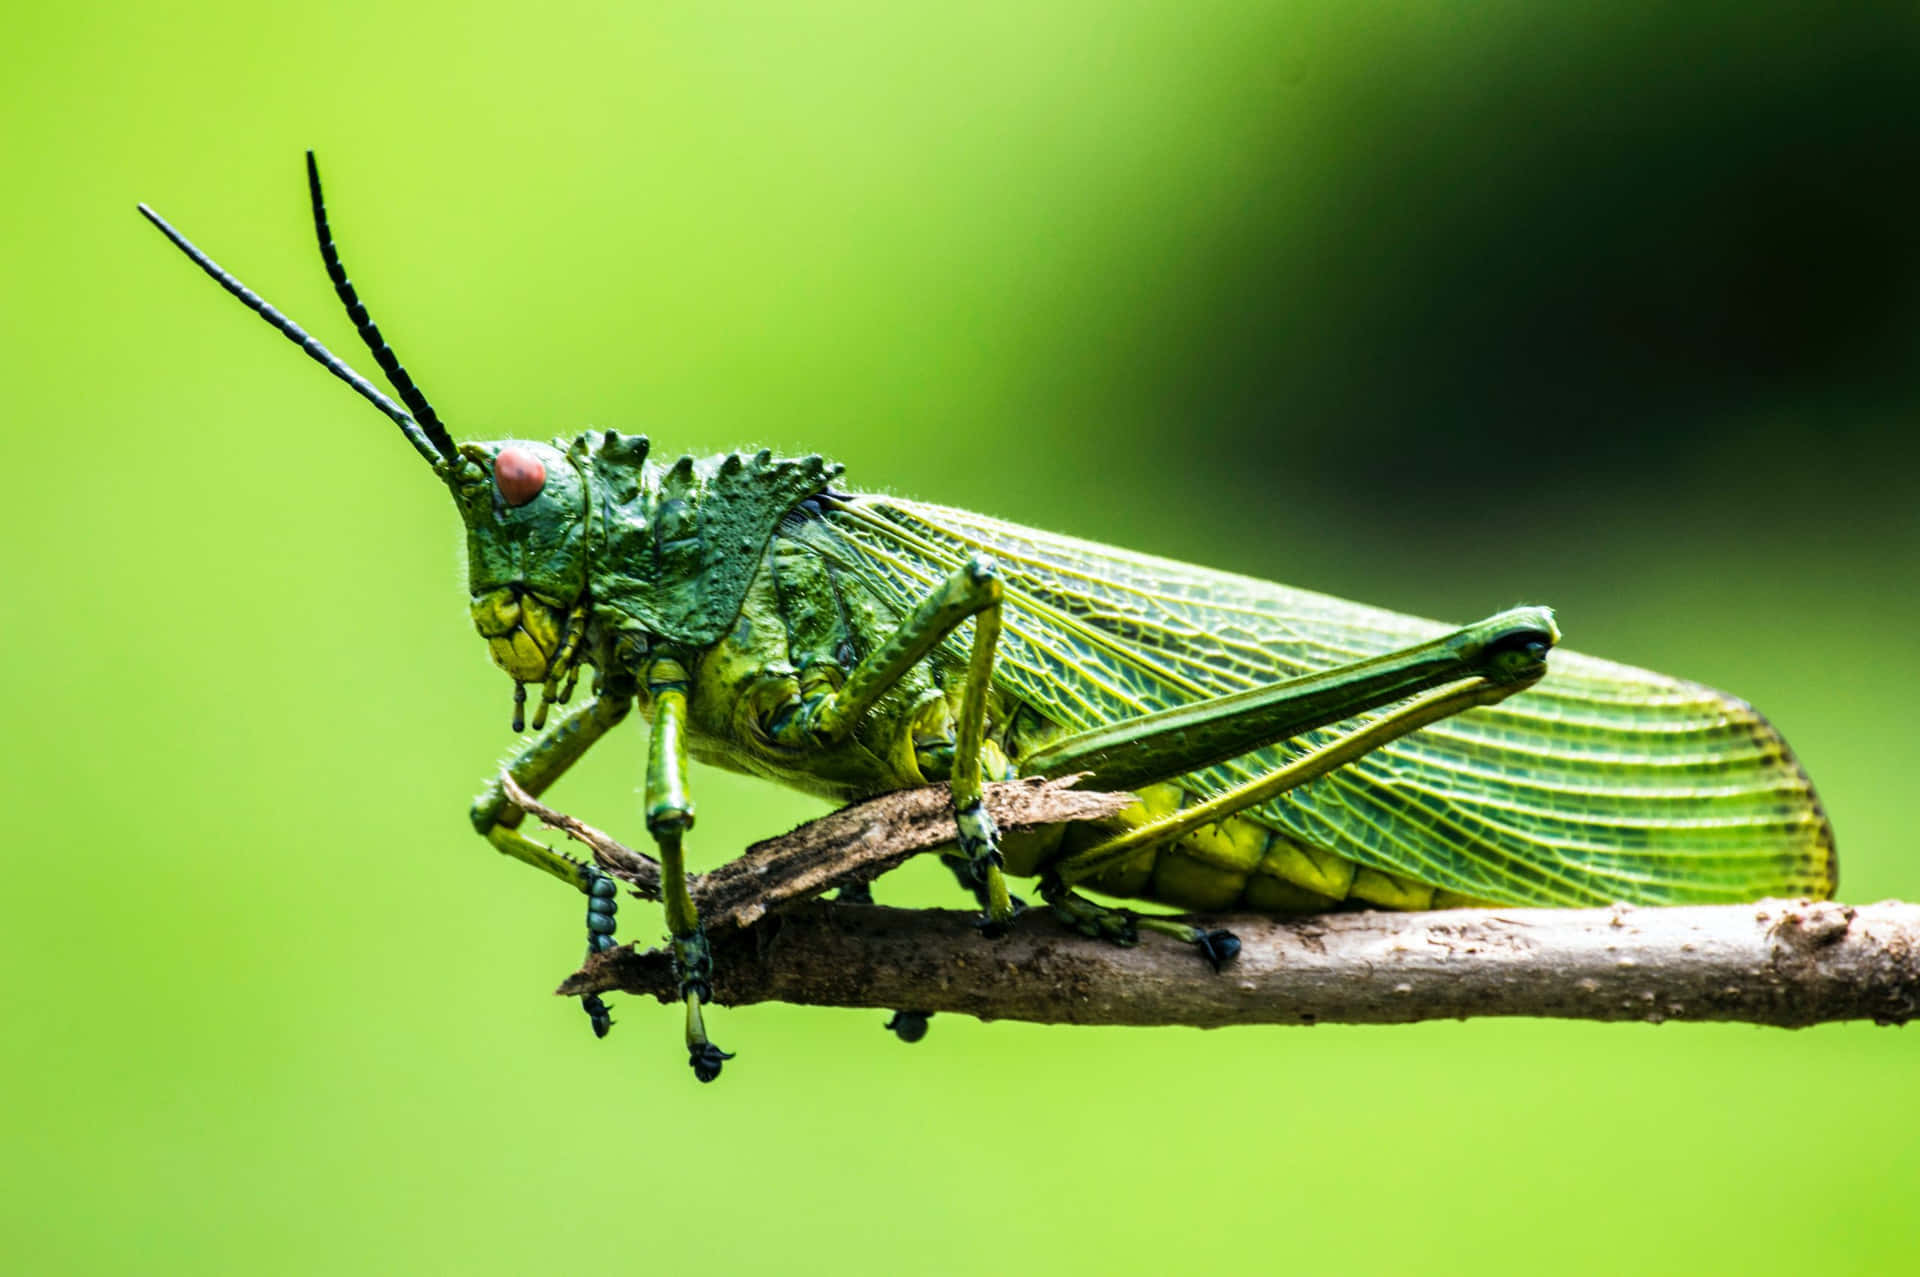 Vibrant close-up image of a grasshopper in its natural environment